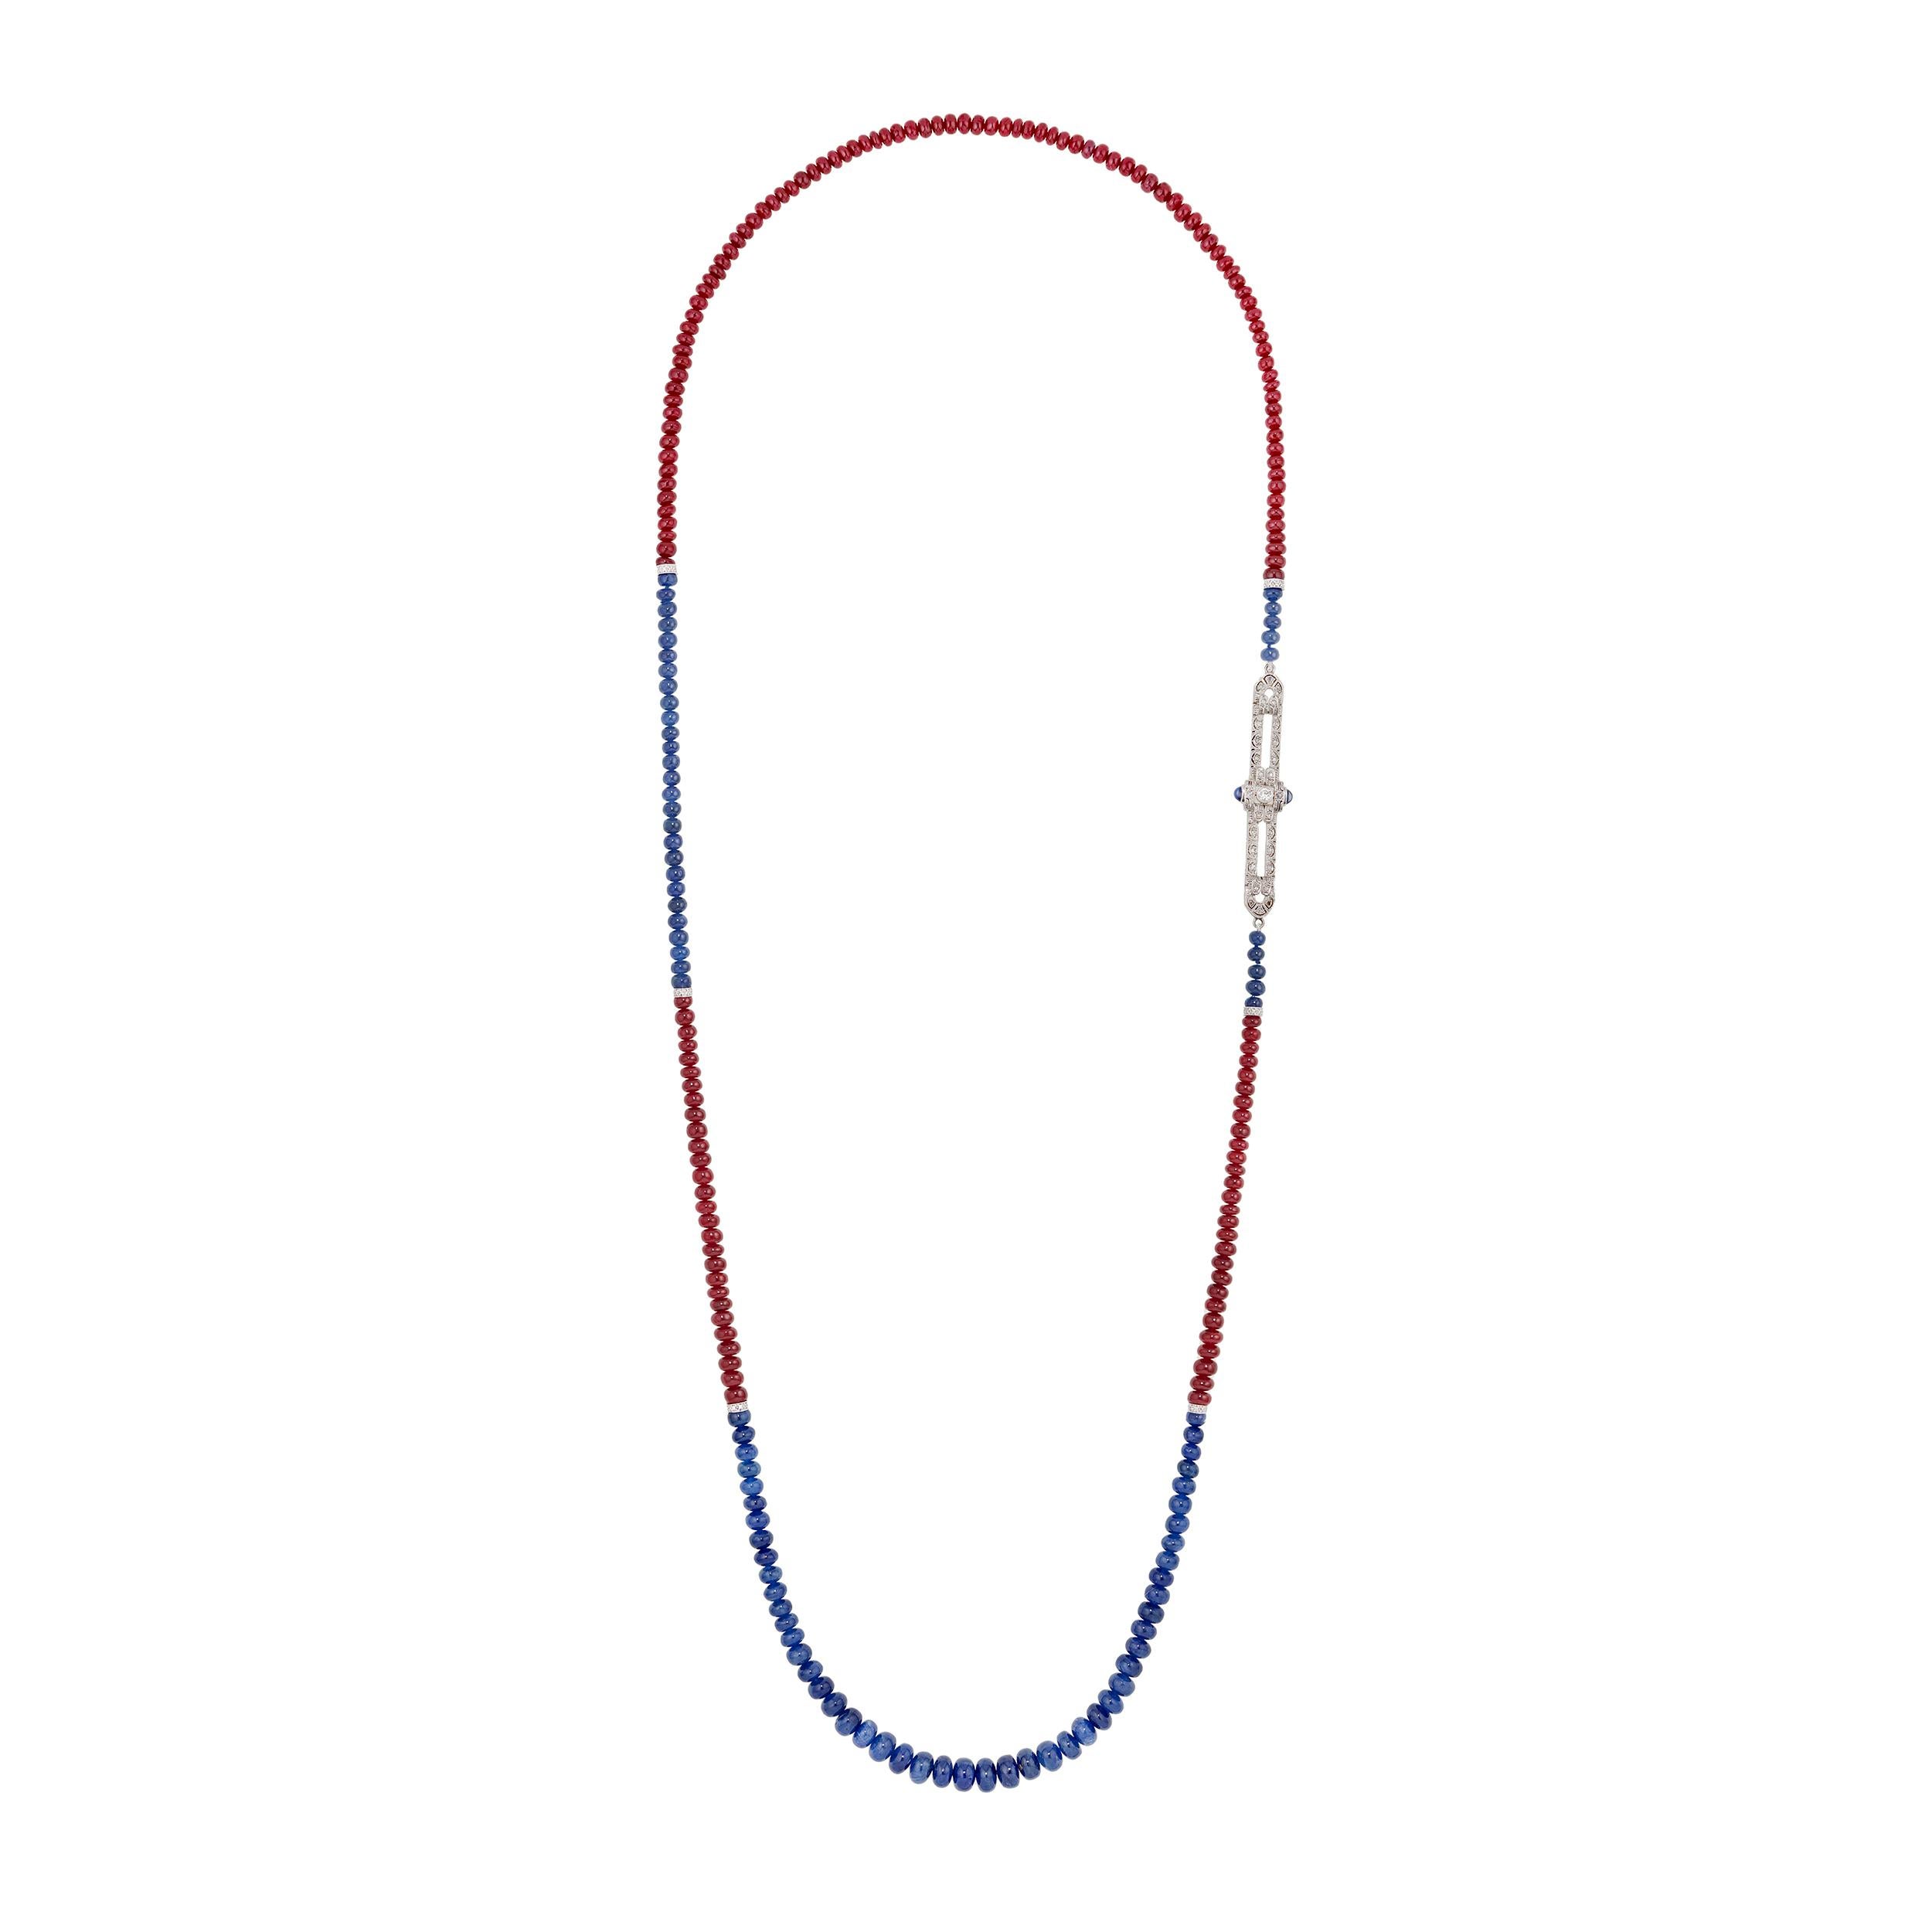 Kiersten Elizabeth's favorite era is the lively, fun, and stylish Art Deco period. She calls this set, Lady Gatsby.  While this color-blocked necklace is certainly a nod to honor that iconic era, it is also modern and versatile.  Listed separately